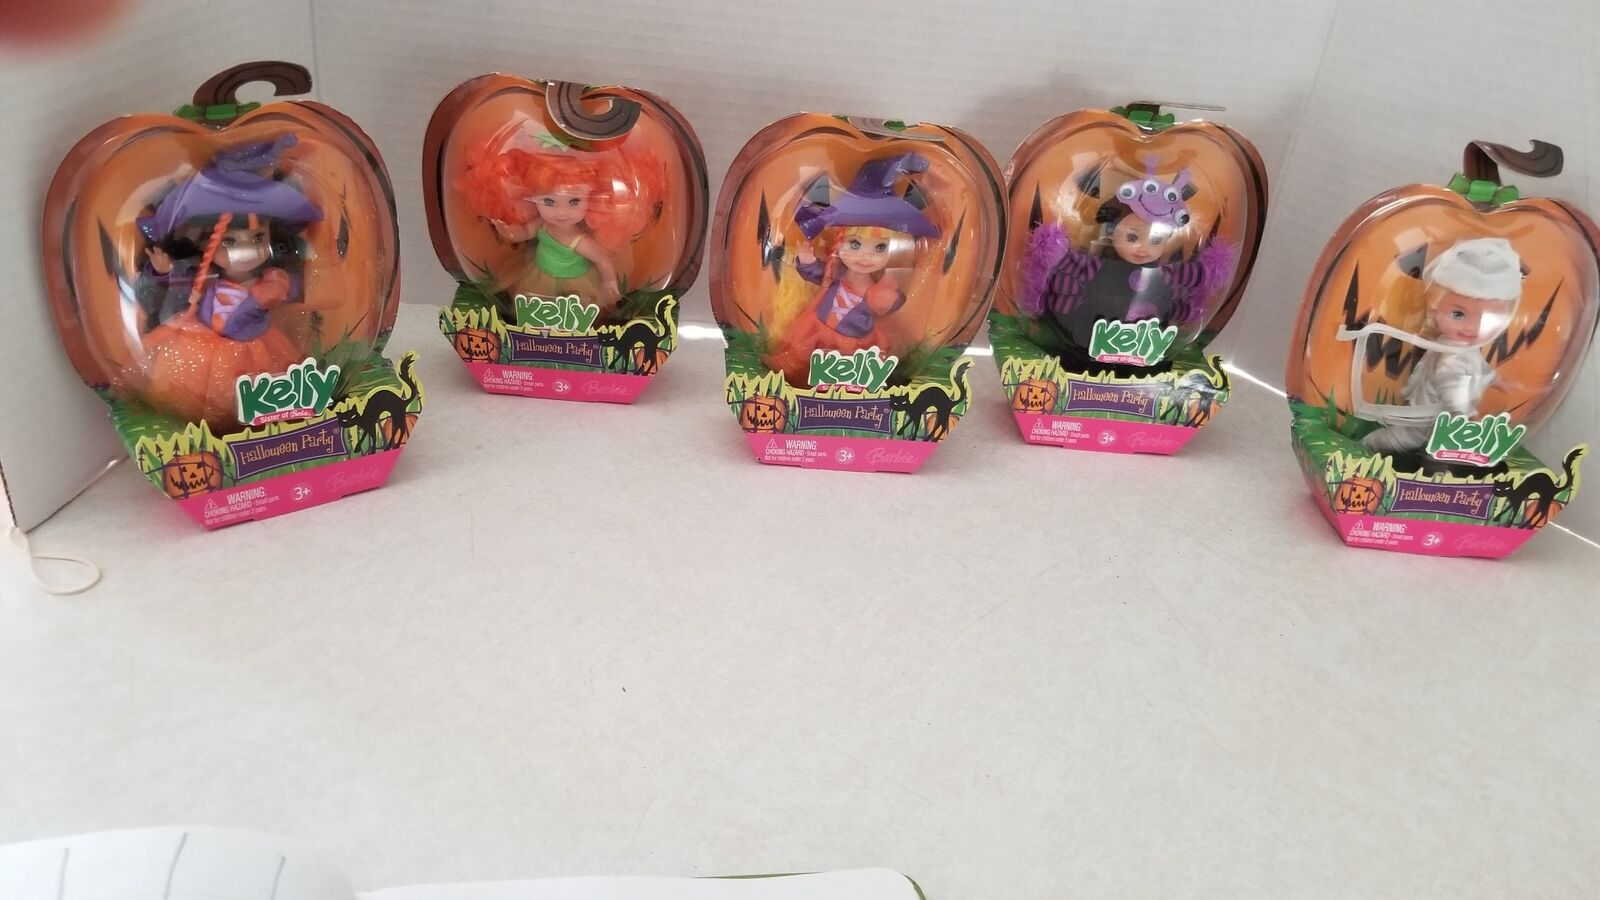 2006 Mattel Complete Set Of 5 Halloween Party Kelly Dolls New O4